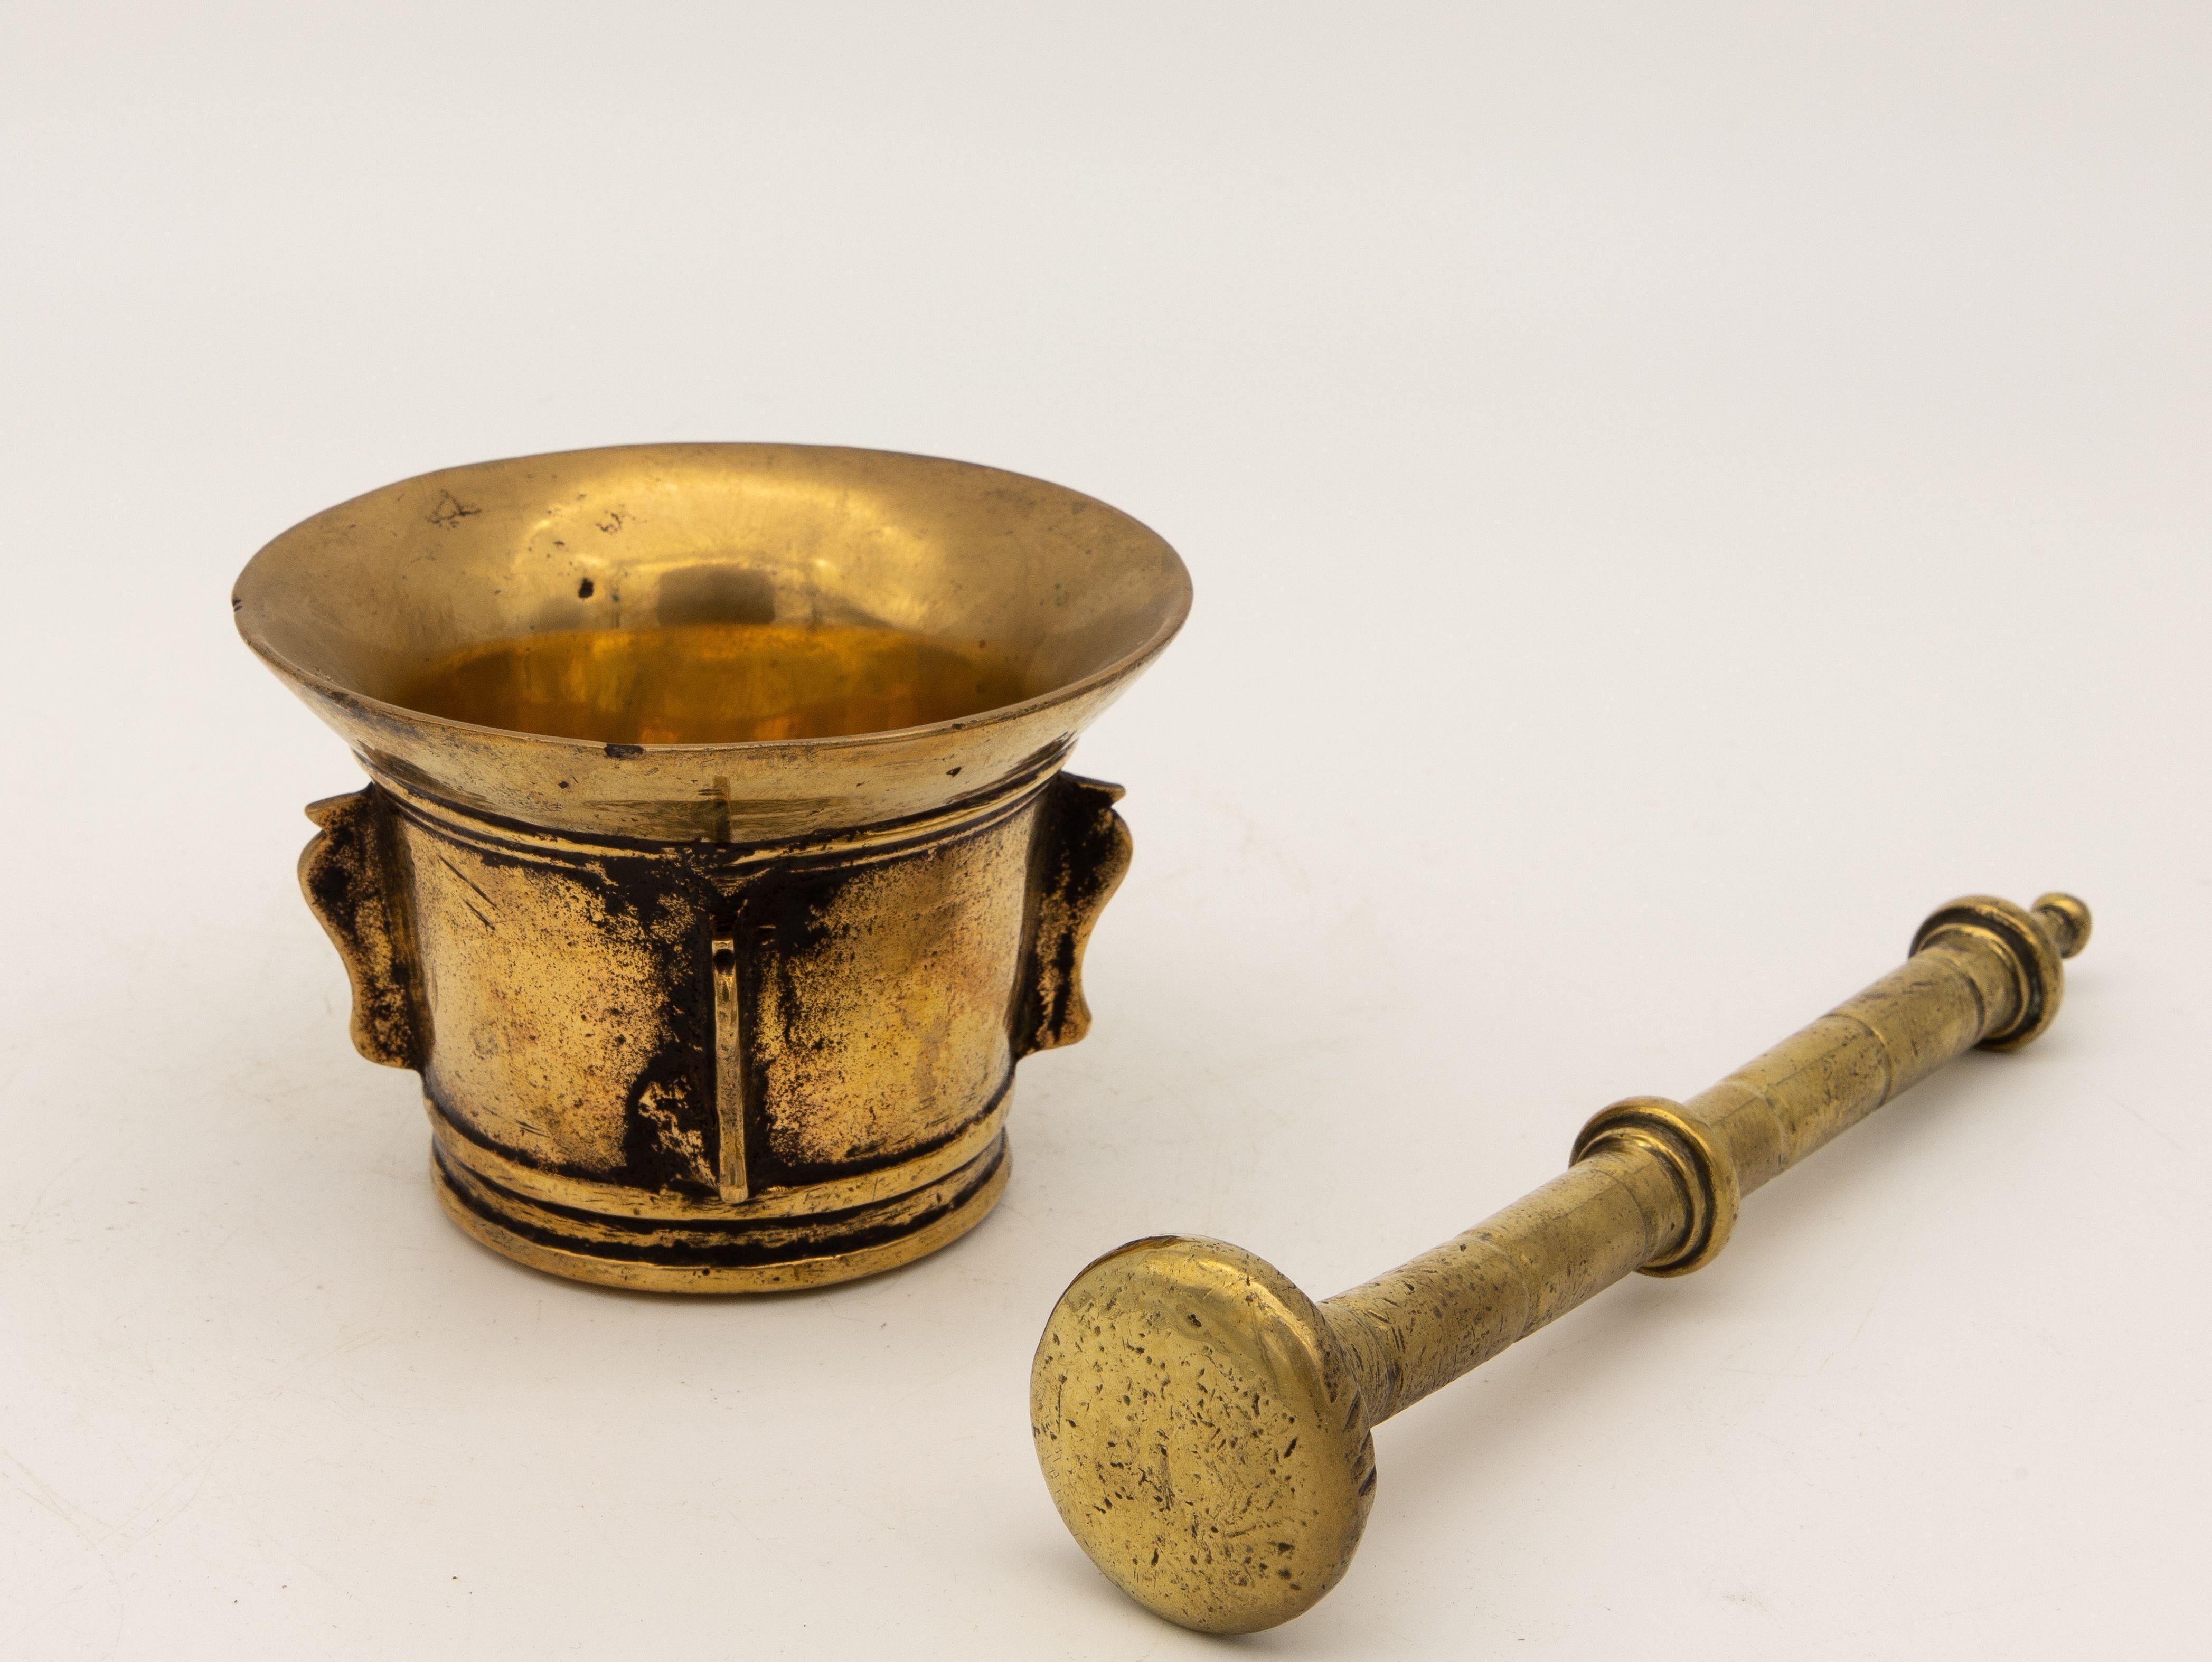 This early 20th-century mortar and pestle is made of brass with an honest patina. Both the mortar and pestle are traditional in style. The mortar has a classic bell-shaped body and the pestle has one rounded end. Brass mortar and pestles were used